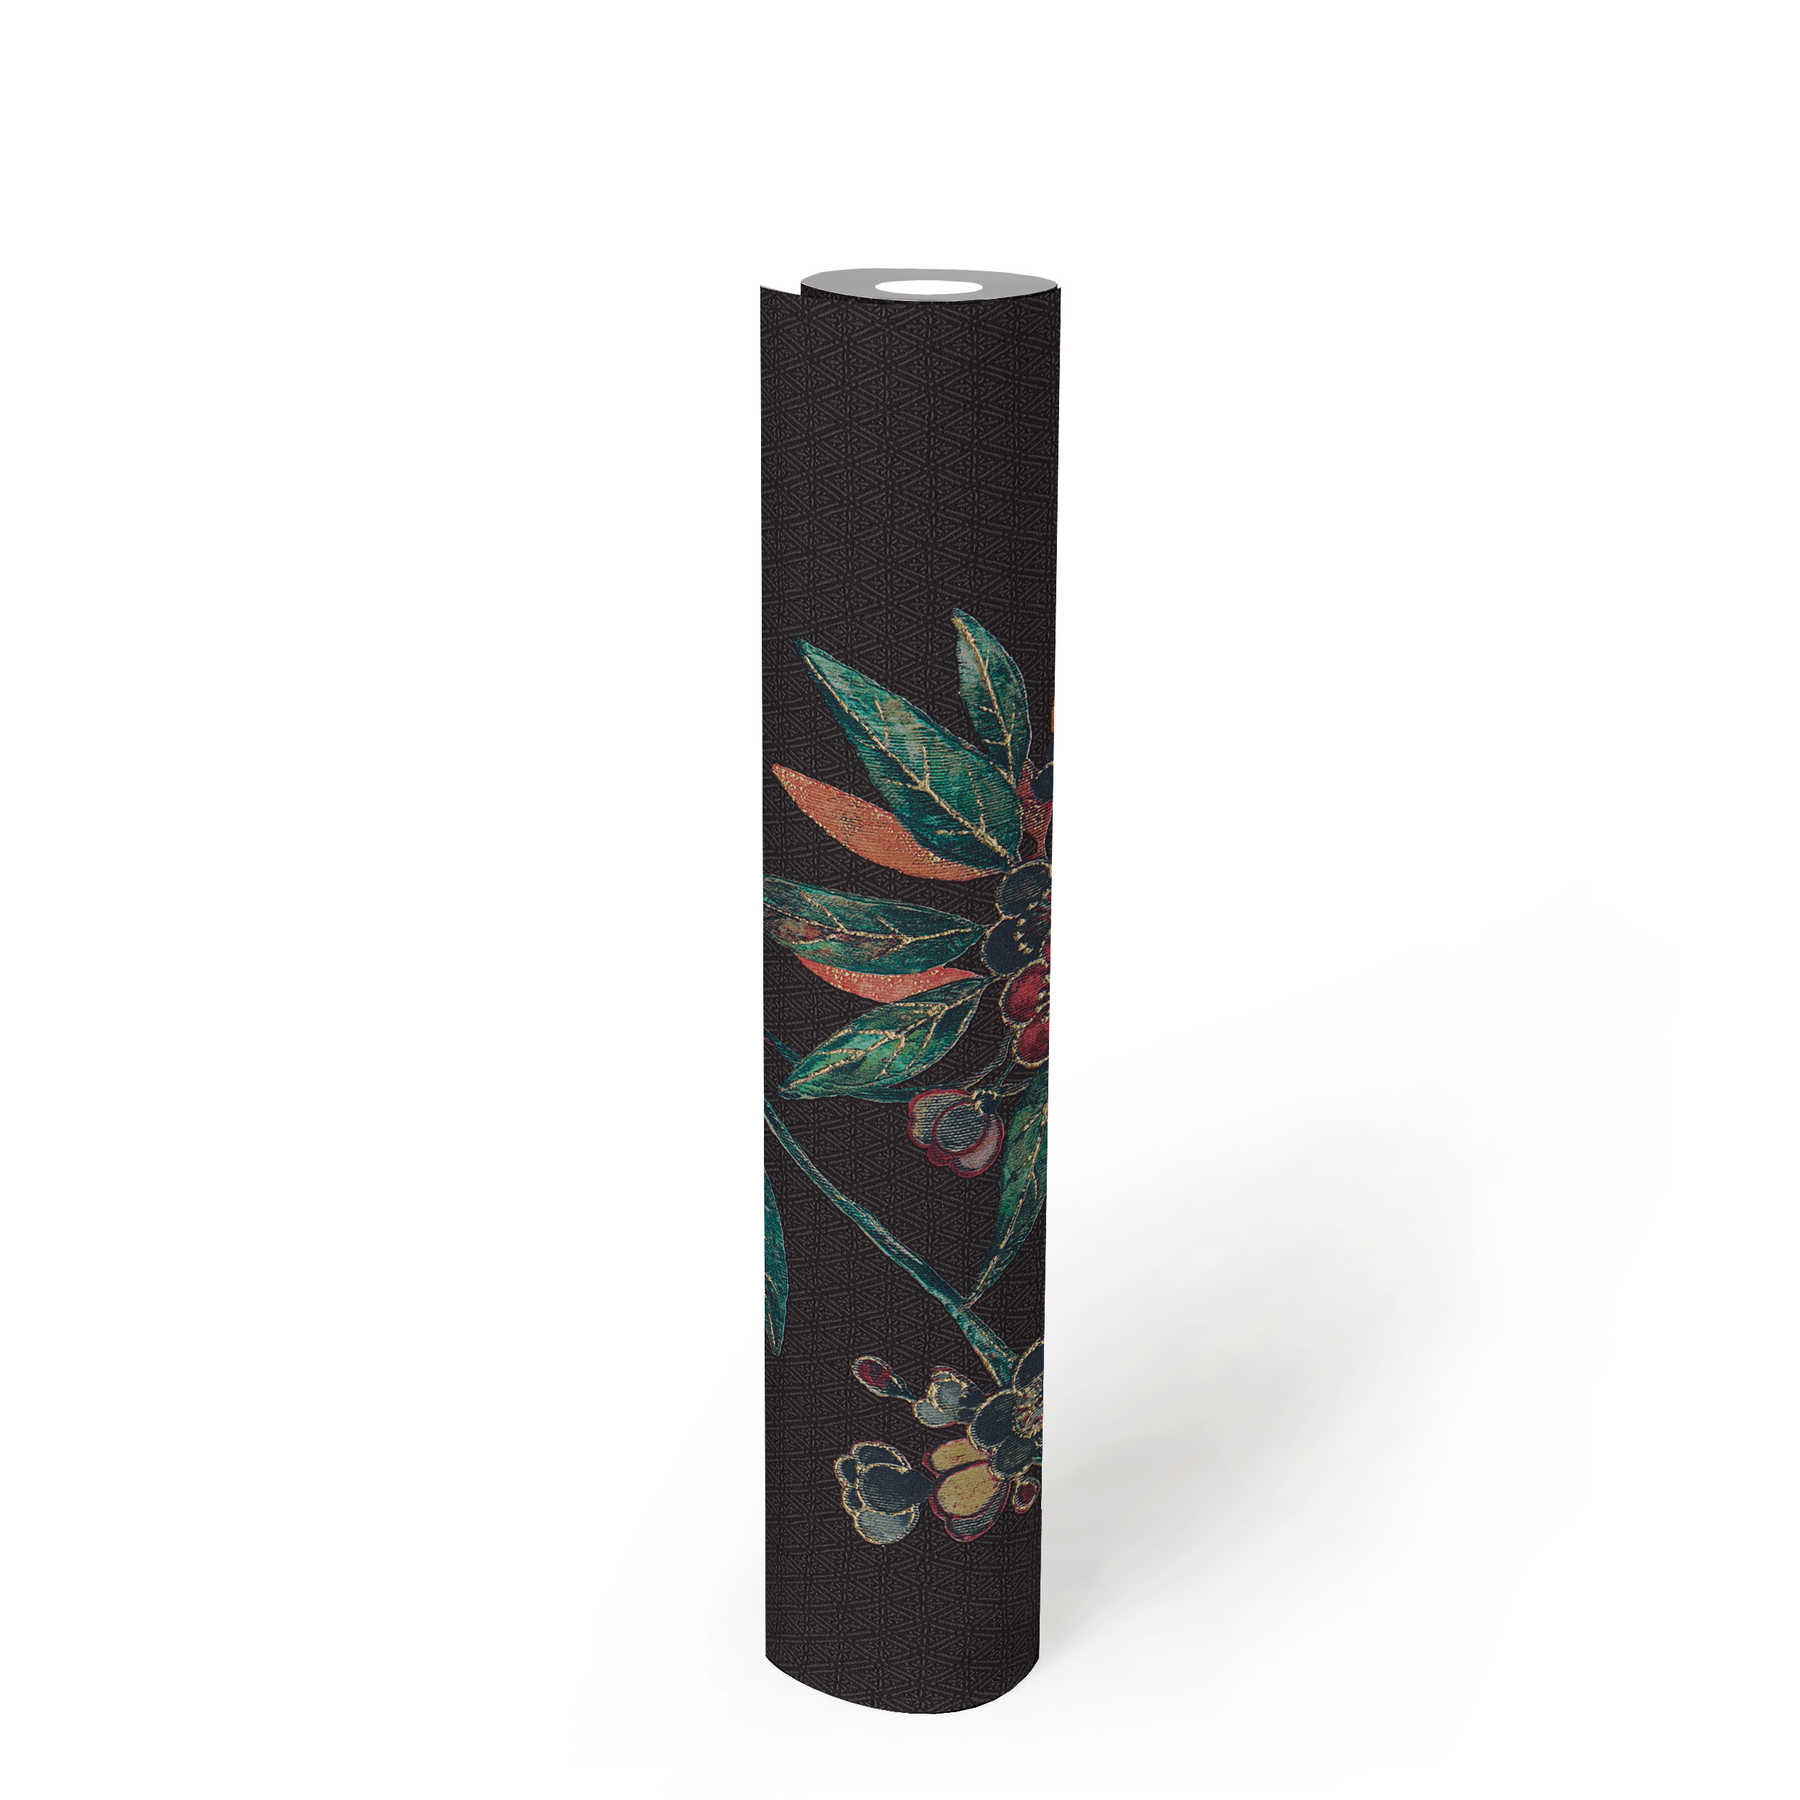             Floral wallpaper with flower tendrils in Asian style - black, green, red
        